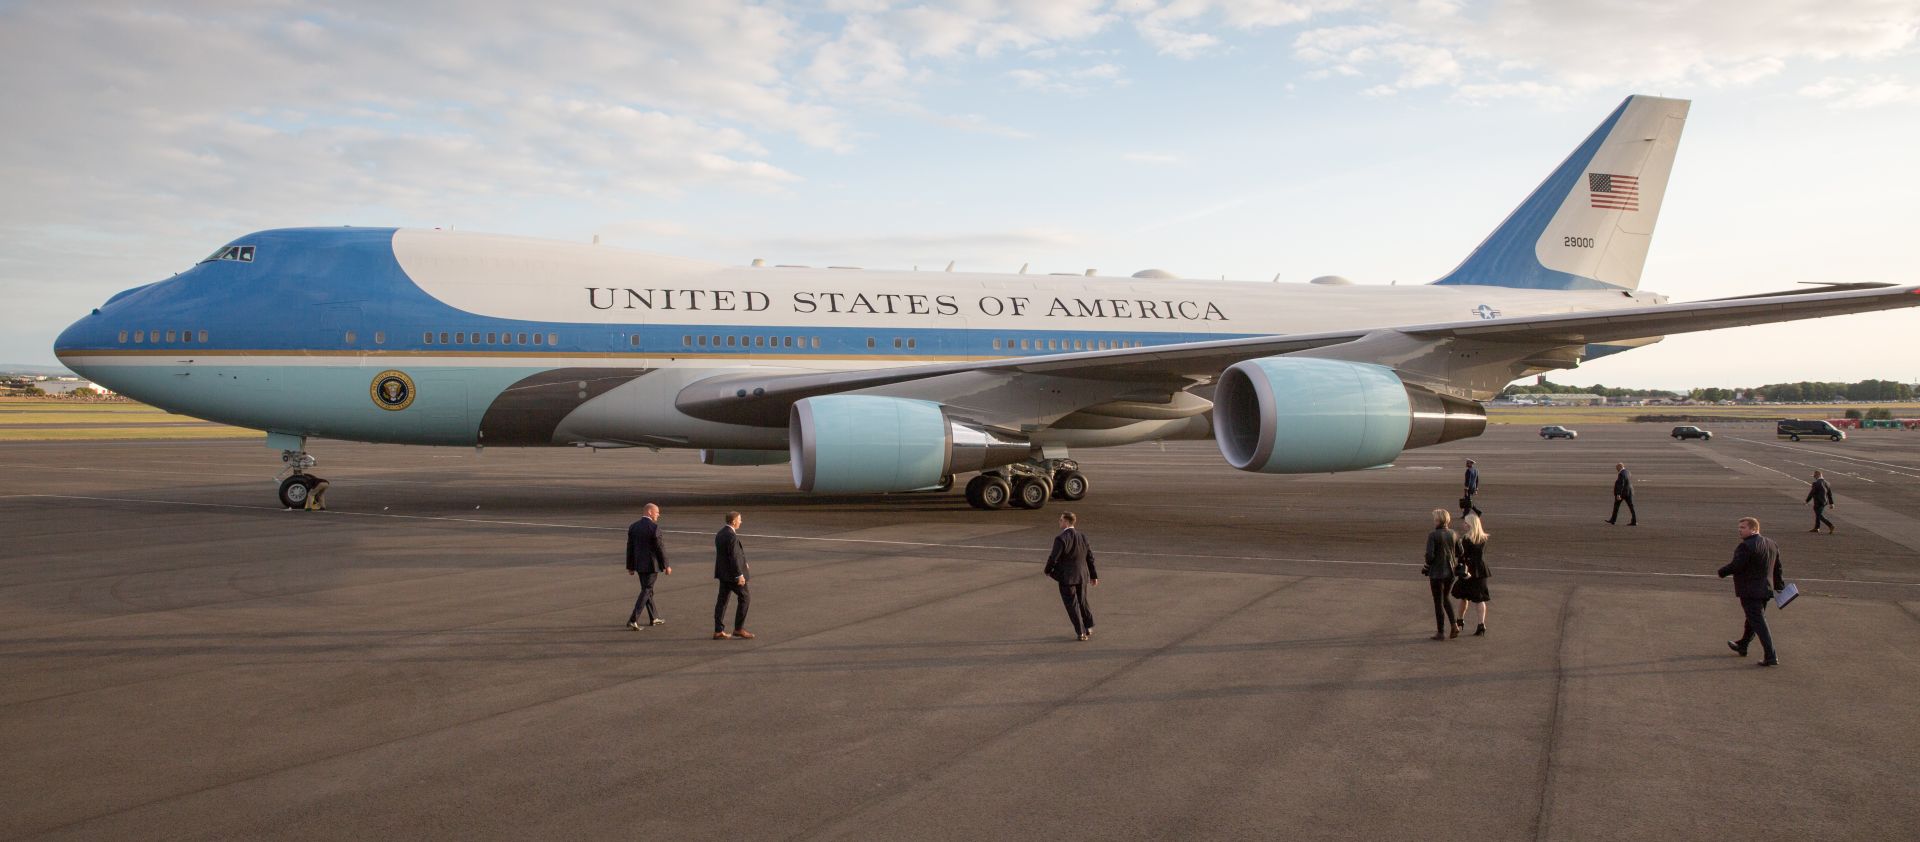 epa06886840 Air Force One carrying US President Donald J. Trump and First Lady Melania Trump  arrives at Prestwick Airport, Ayrshire, Scotland 13 July 2018. US President Trump is on a three-day working visit to the United Kingdom, his first trip to the country as US president.  EPA/Robert Perry